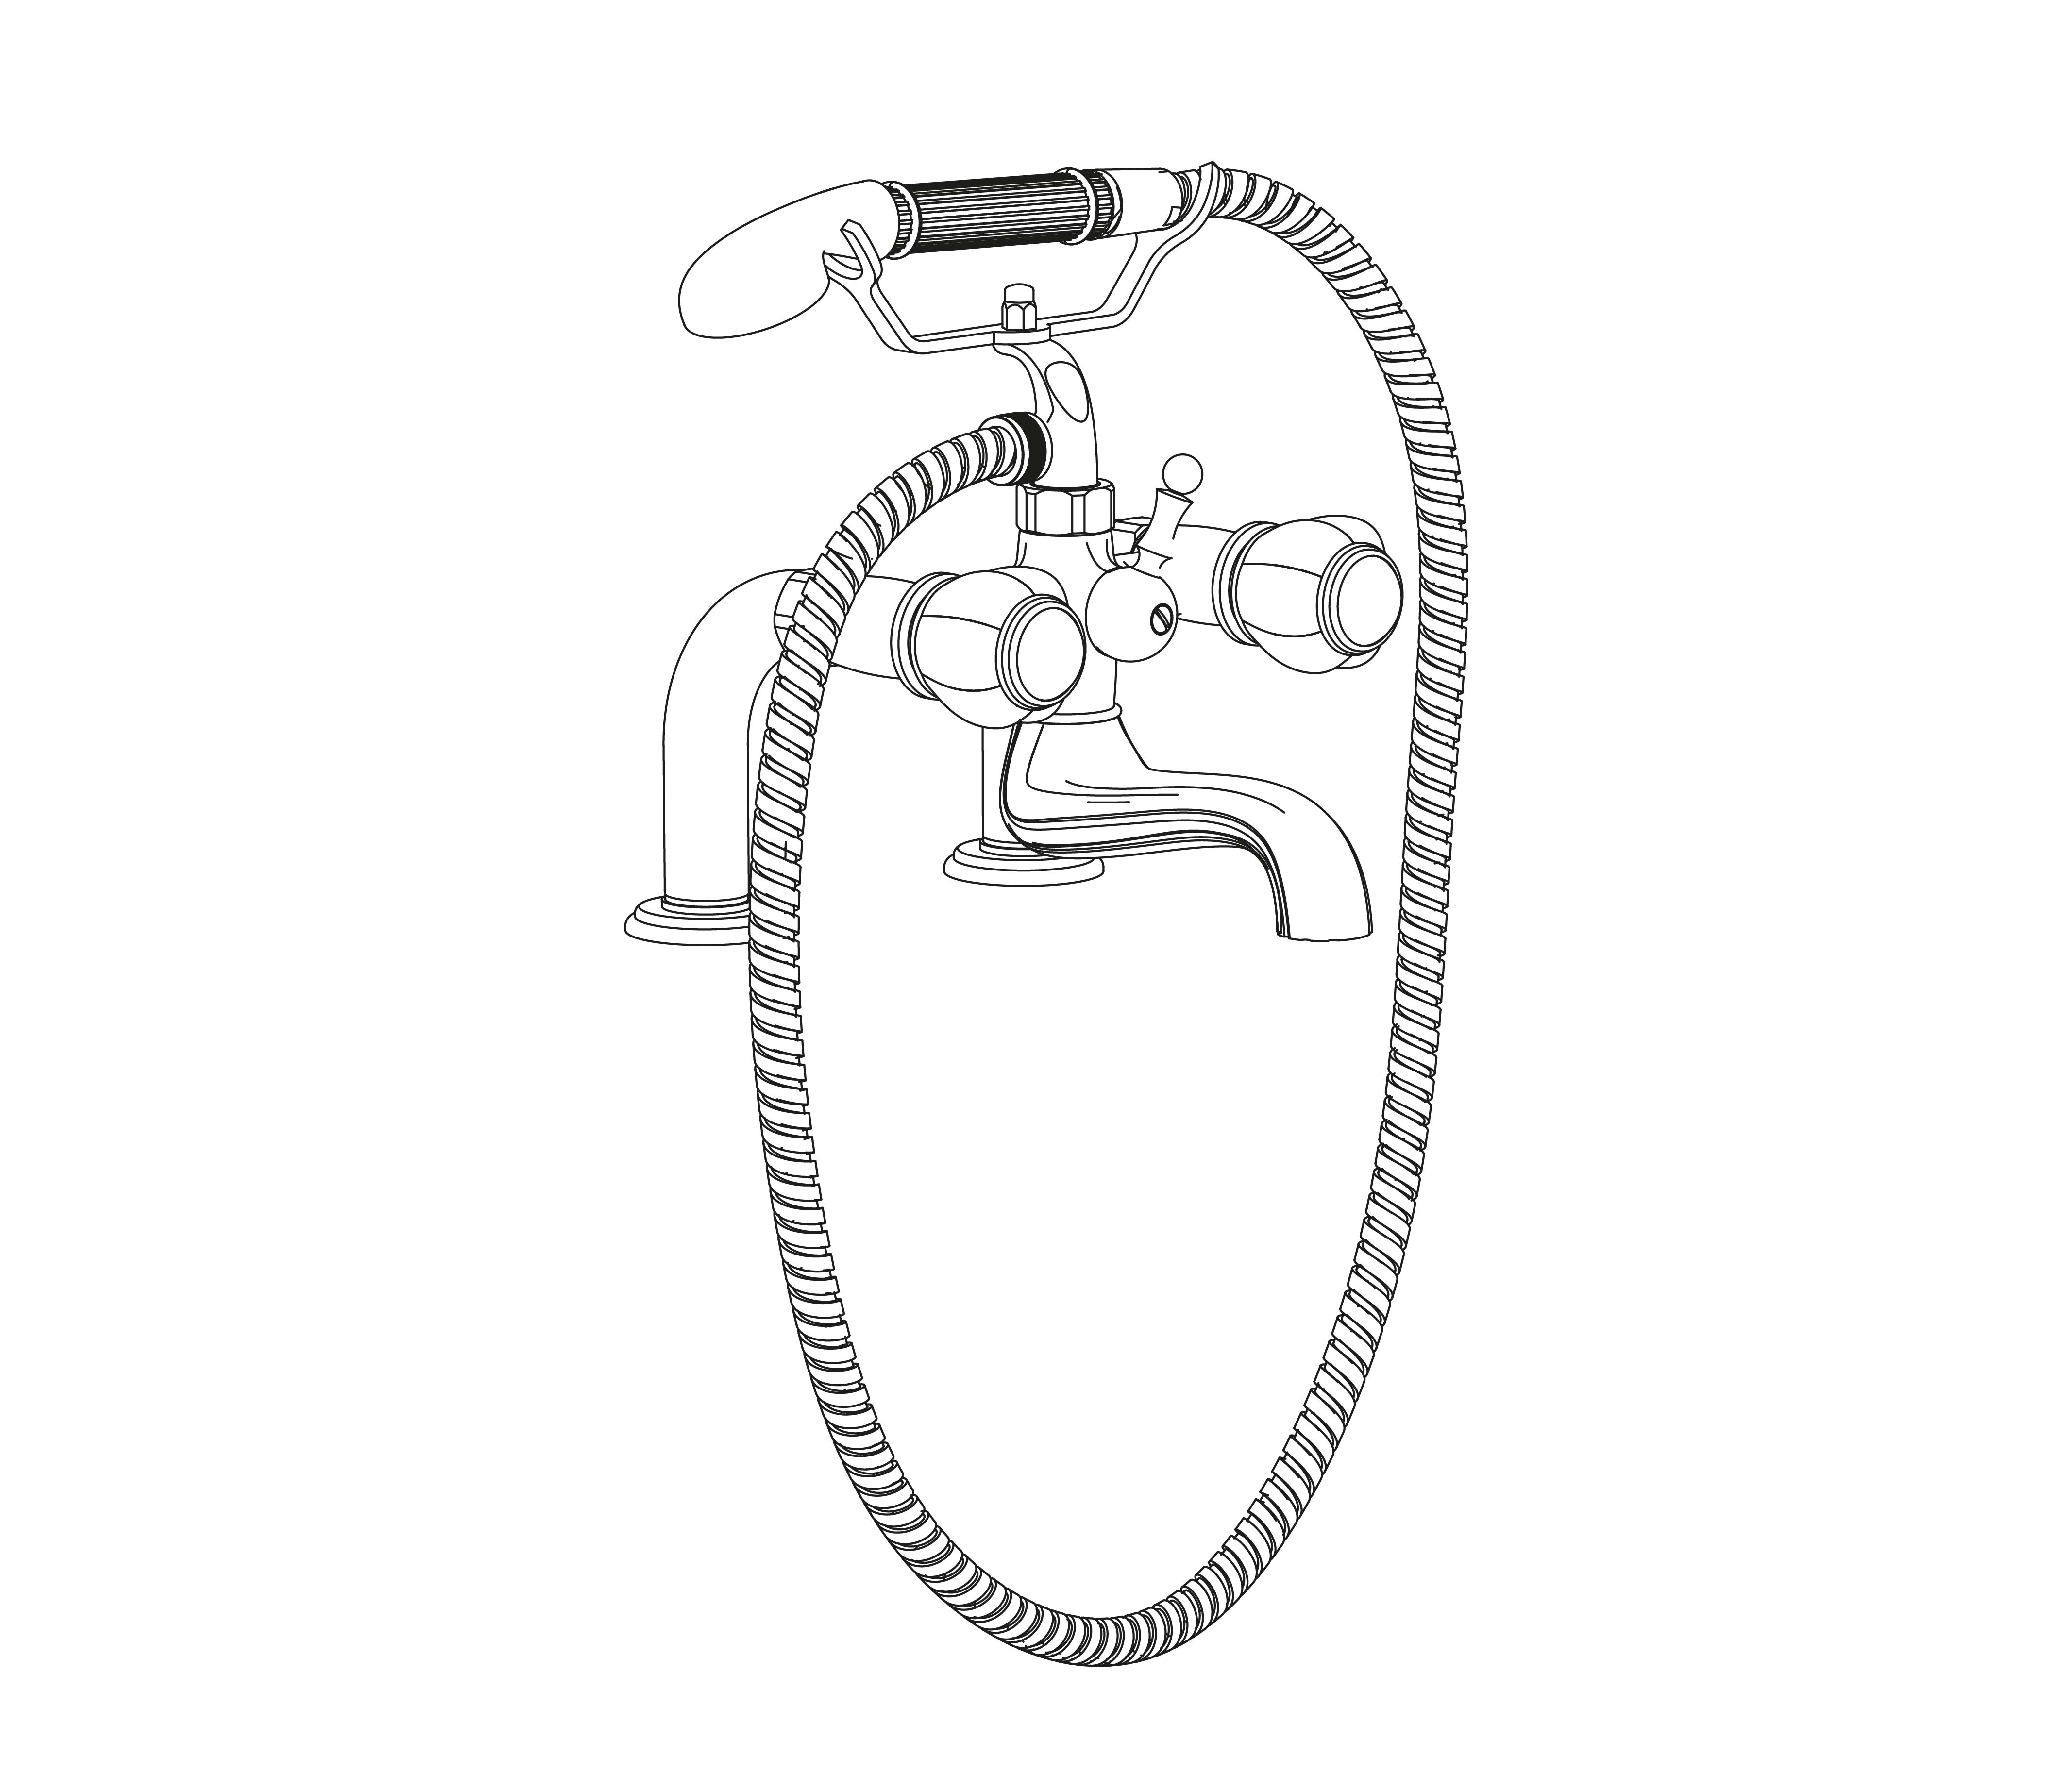 S161-3306 Rim mounted bath and shower mixer